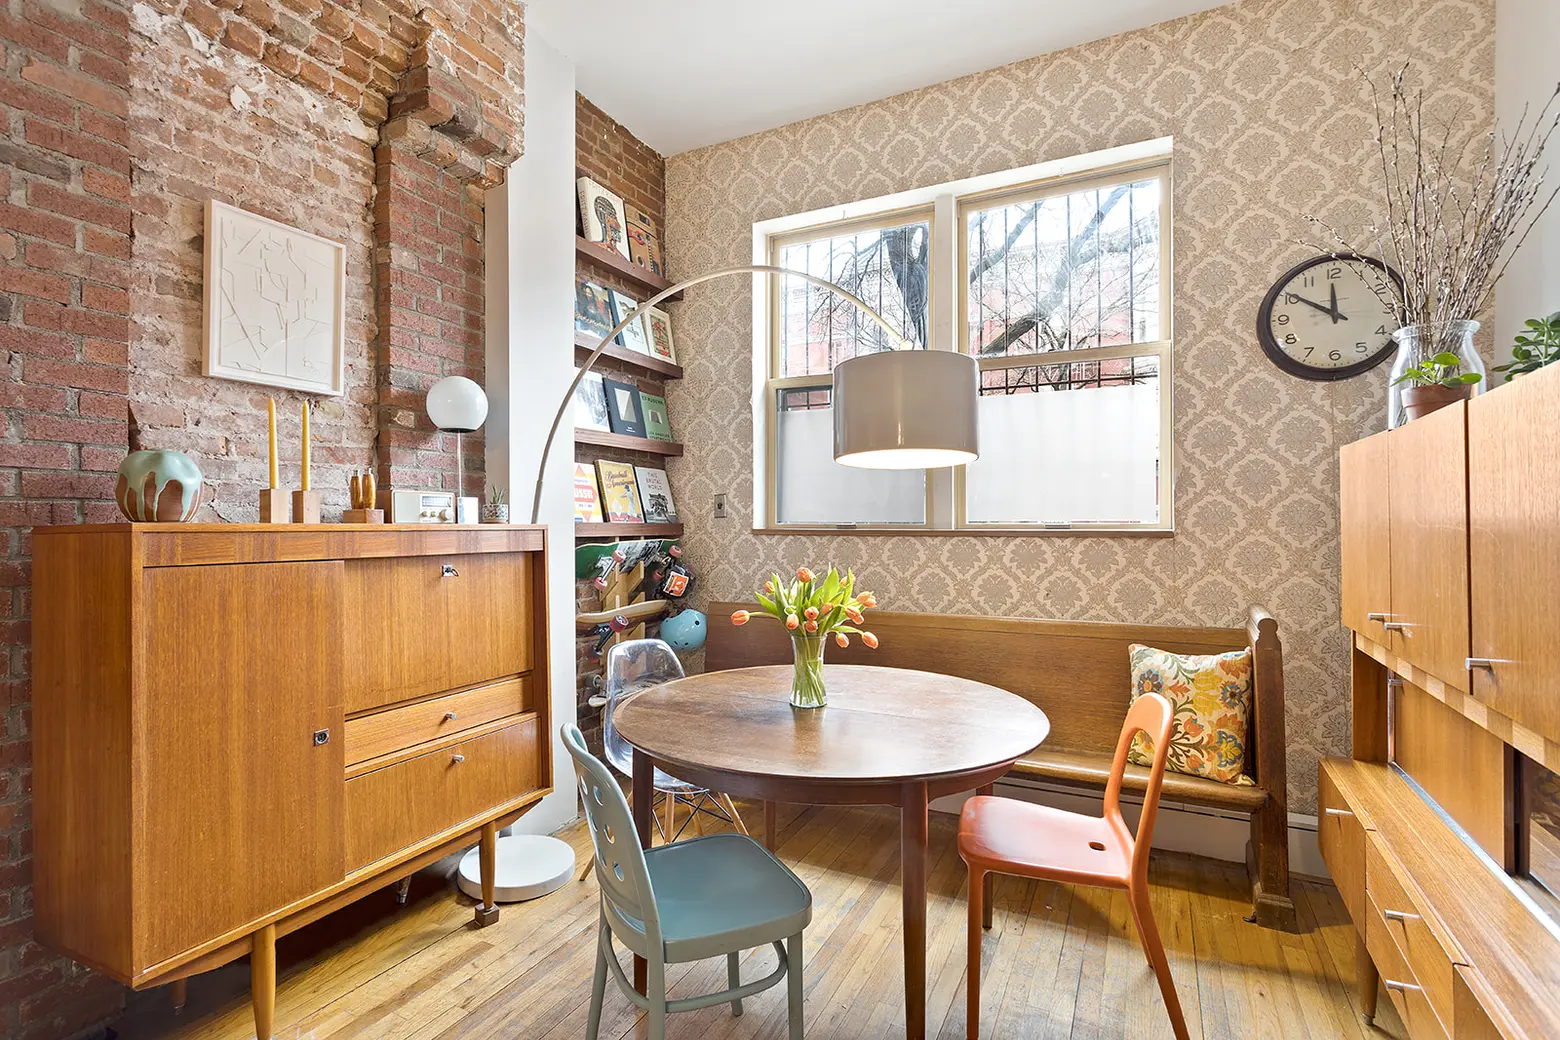 This Park Slope garden duplex has funky vintage style within and a sweet back patio for just over $1M